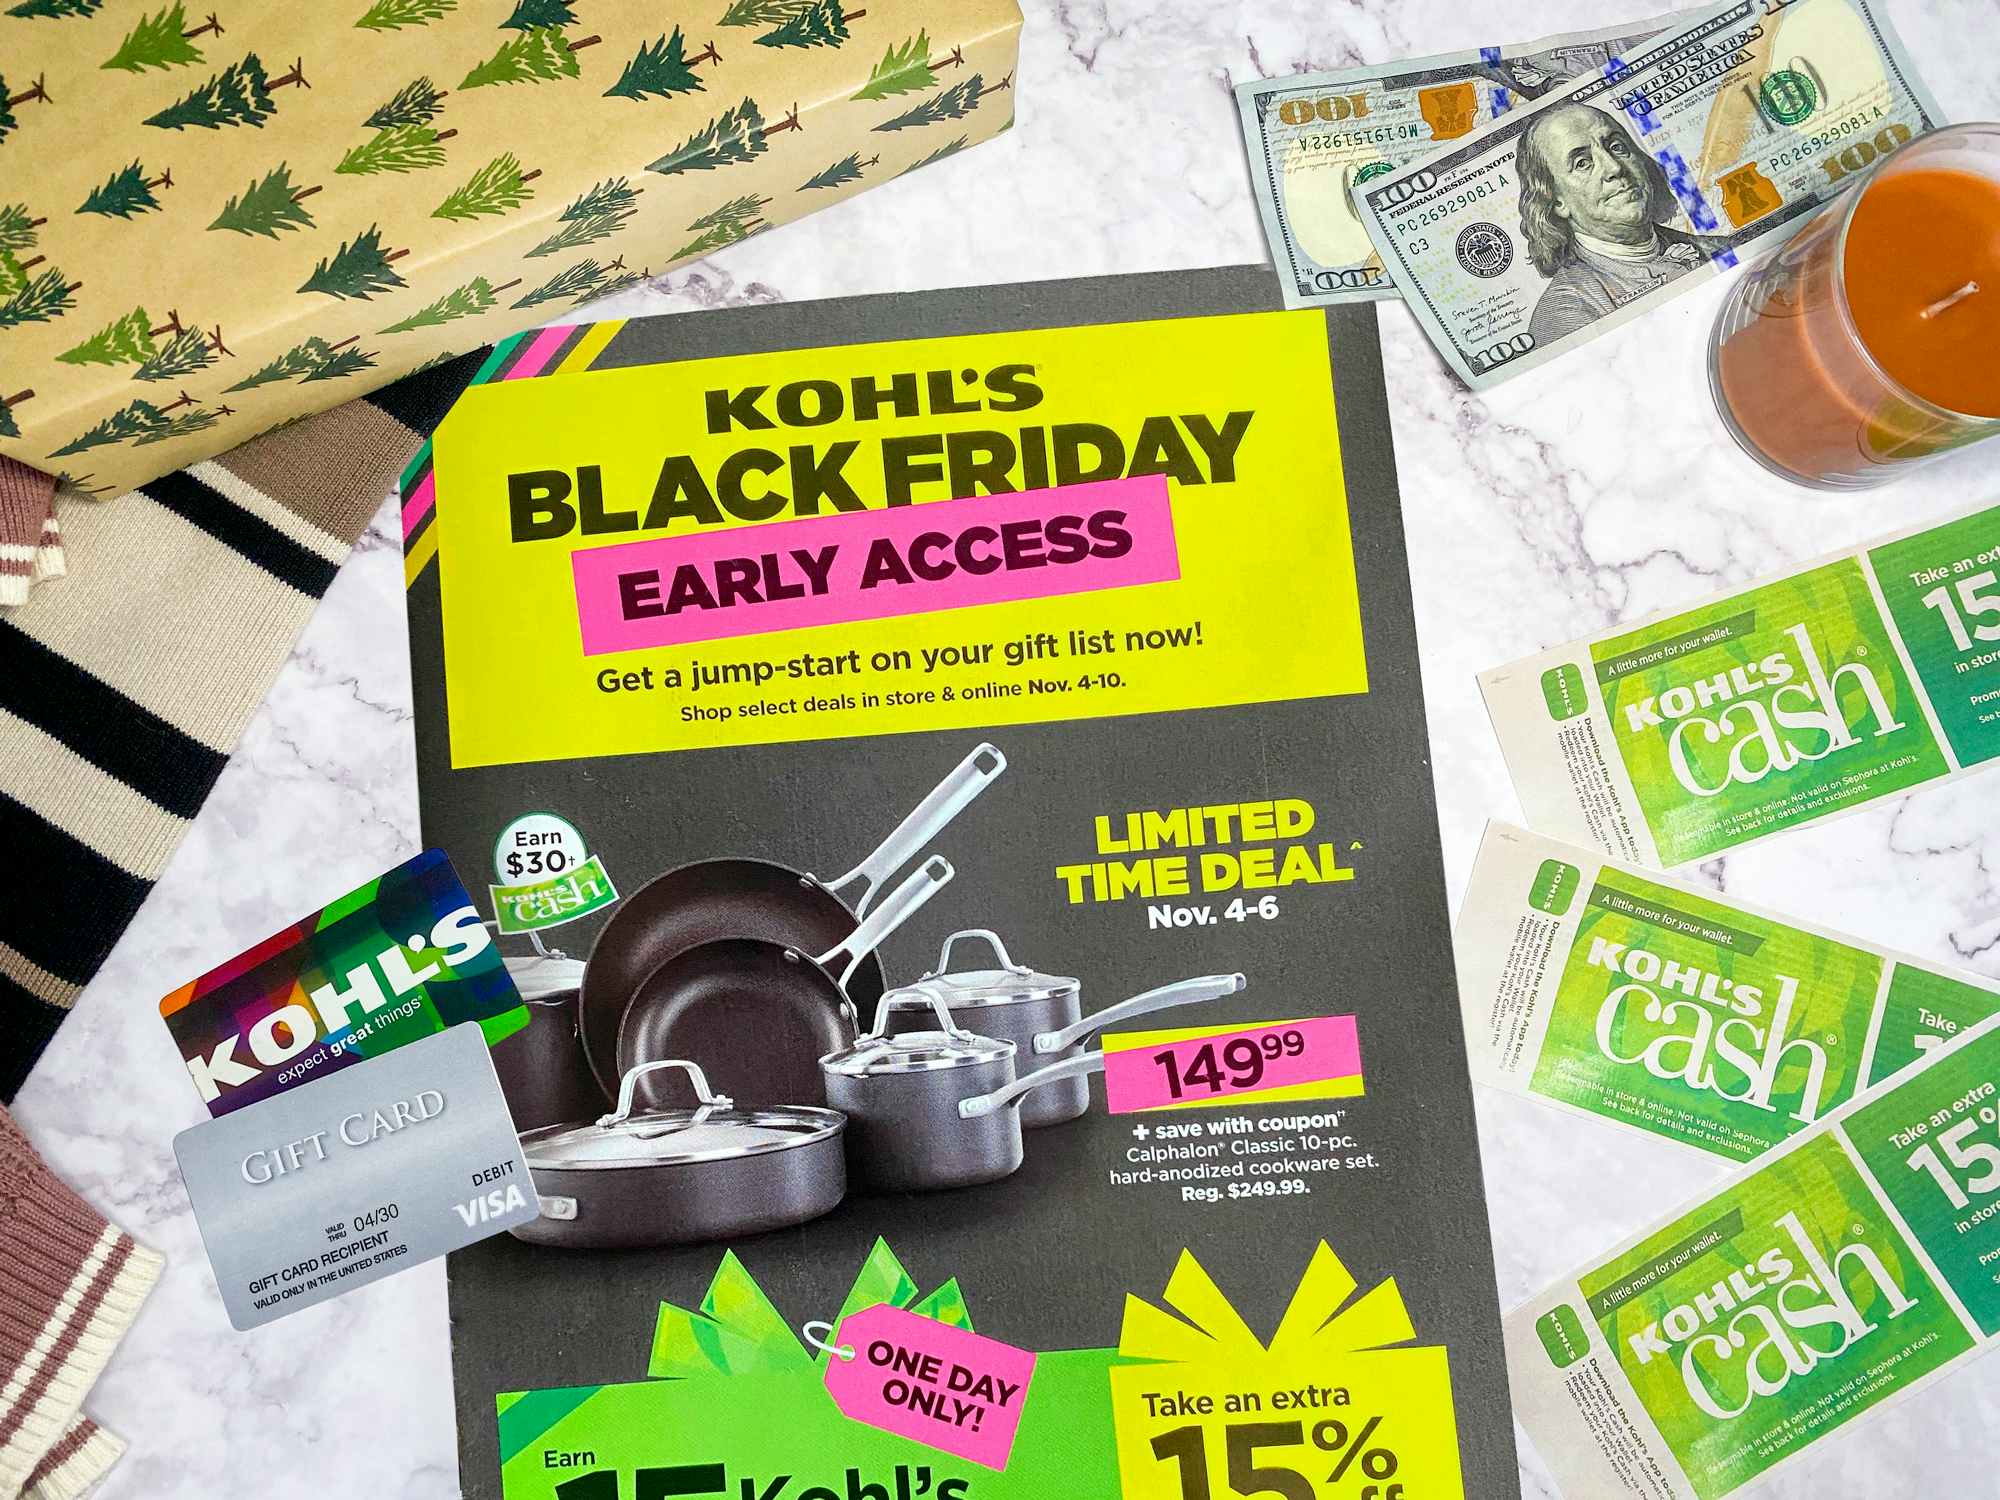 Kohl's Coupon Codes: 30% off, free shipping + earn Kohl's Cash